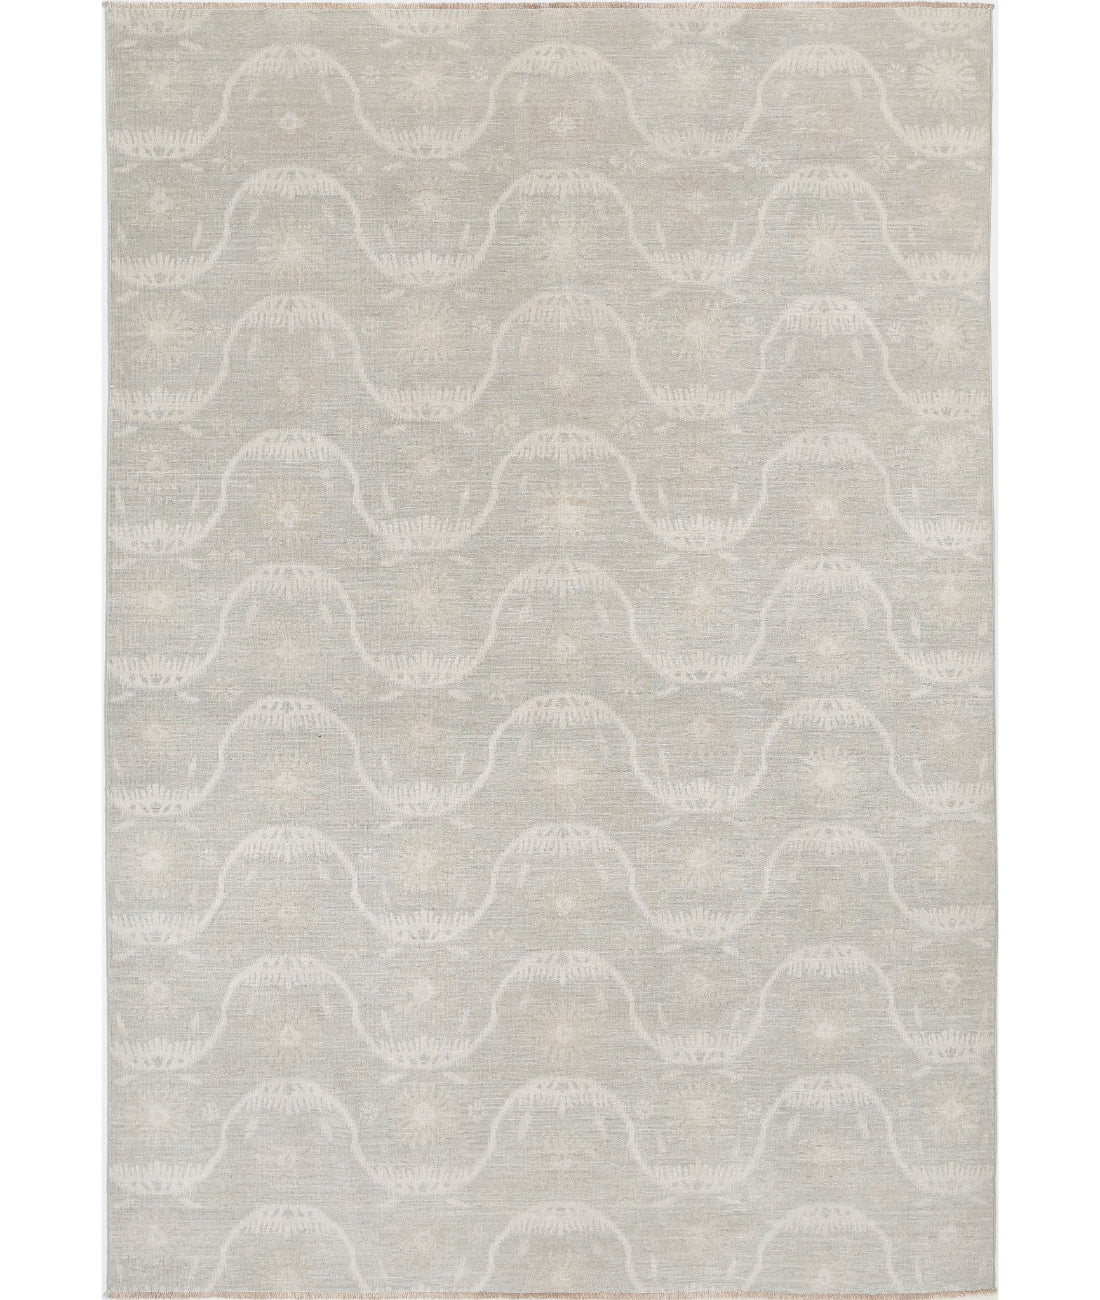 Hand Knotted Ikat Wool Rug - 6&#39;3&#39;&#39; x 9&#39;0&#39;&#39; 6&#39;3&#39;&#39; x 9&#39;0&#39;&#39; (188 X 270) / Ivory / Grey